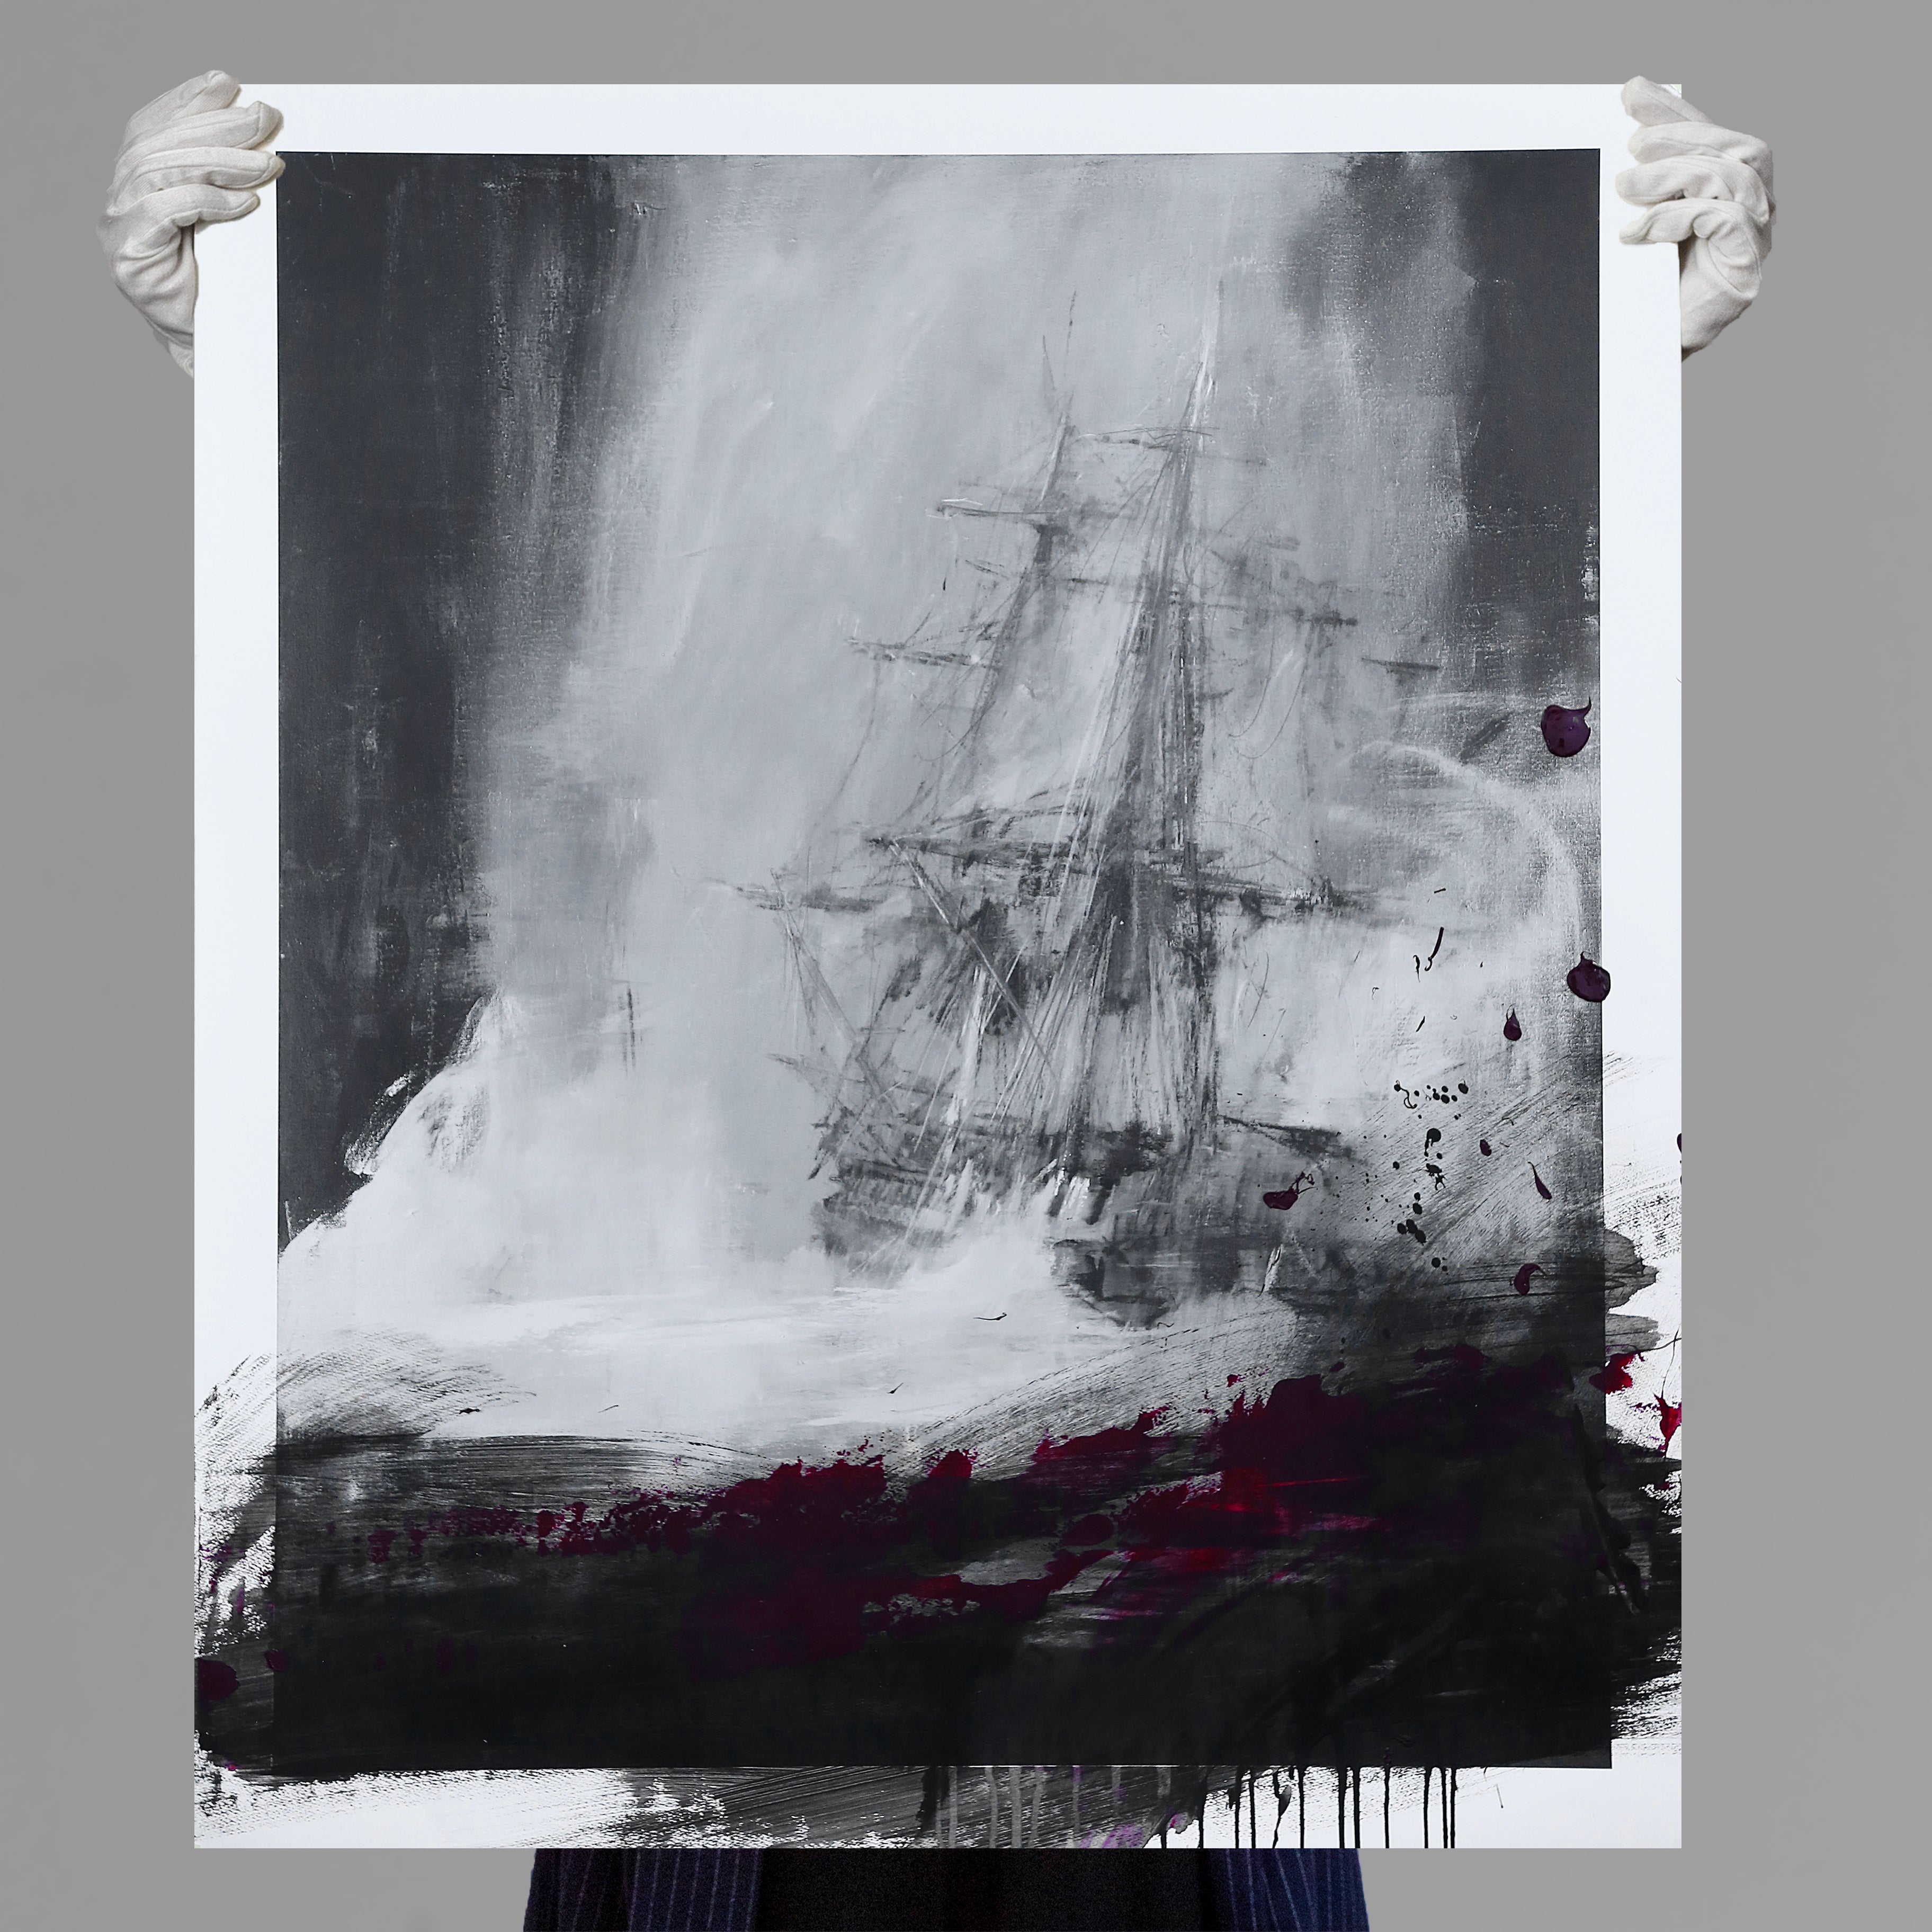 Jake Wood-Evans - Seascape with Charcoal (Crimson)